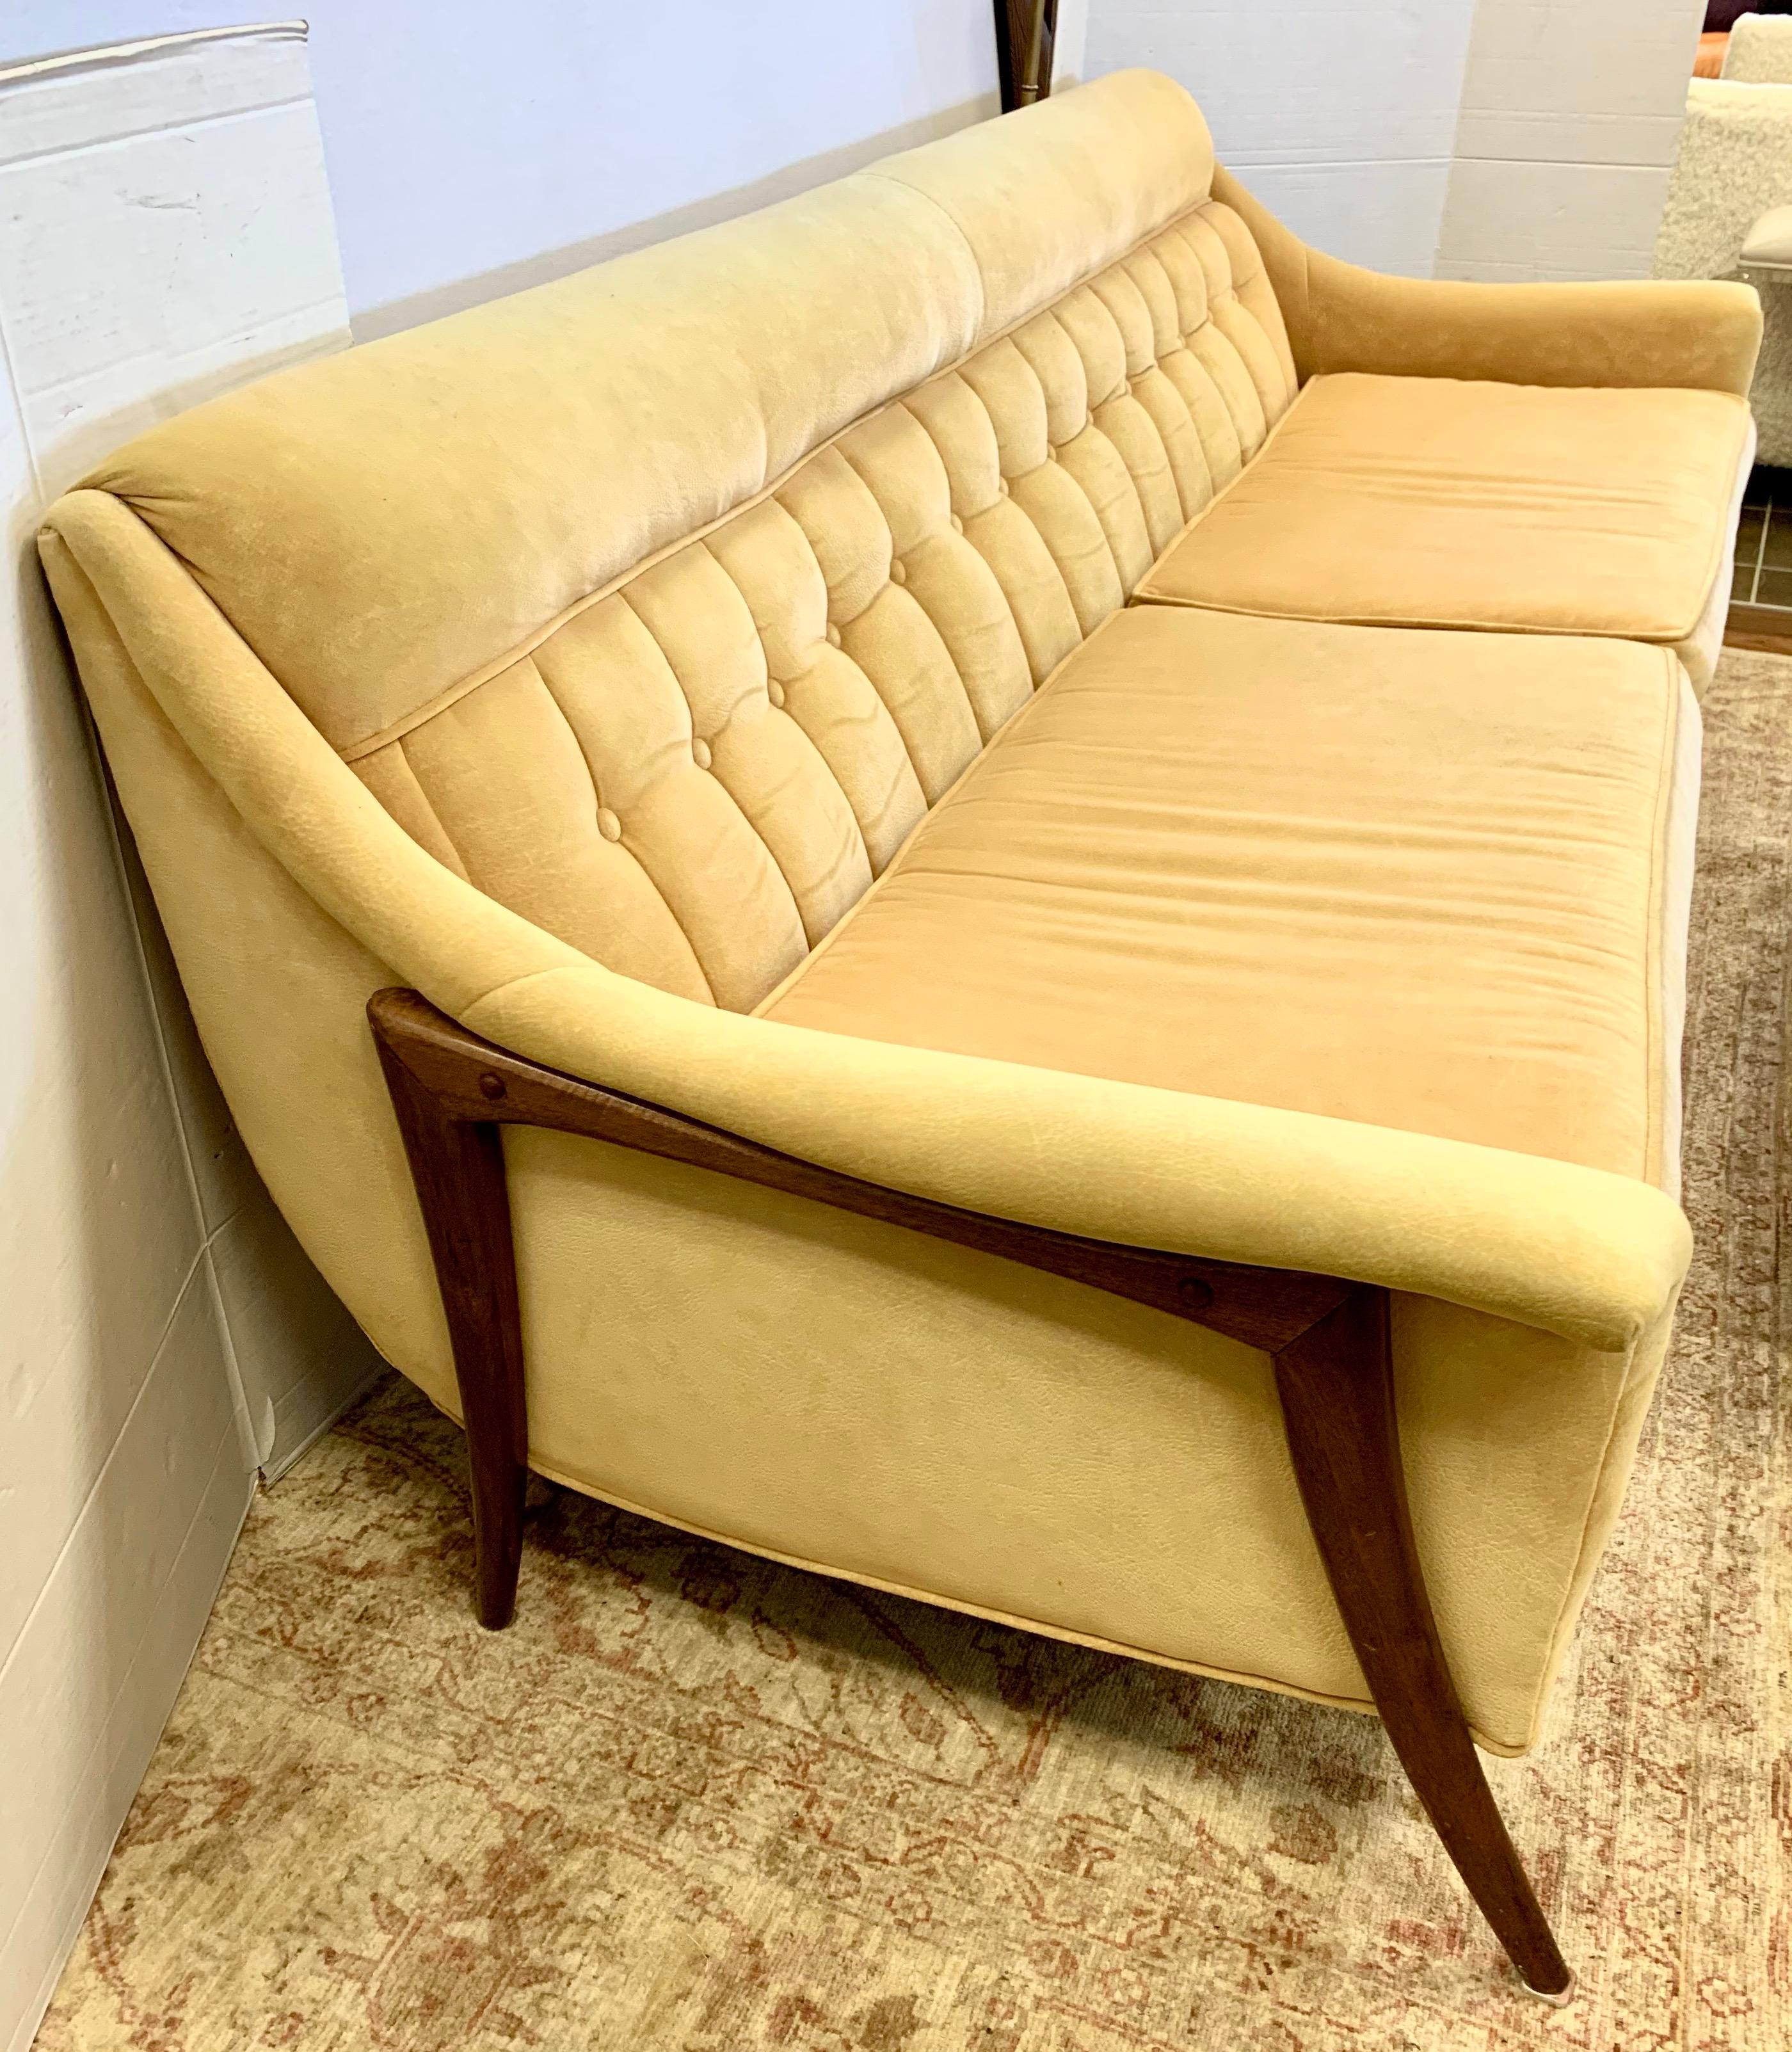 Late 20th Century Midcentury Danish Modern Tufted Sculptural Sofa with Ultra Suede Fabric